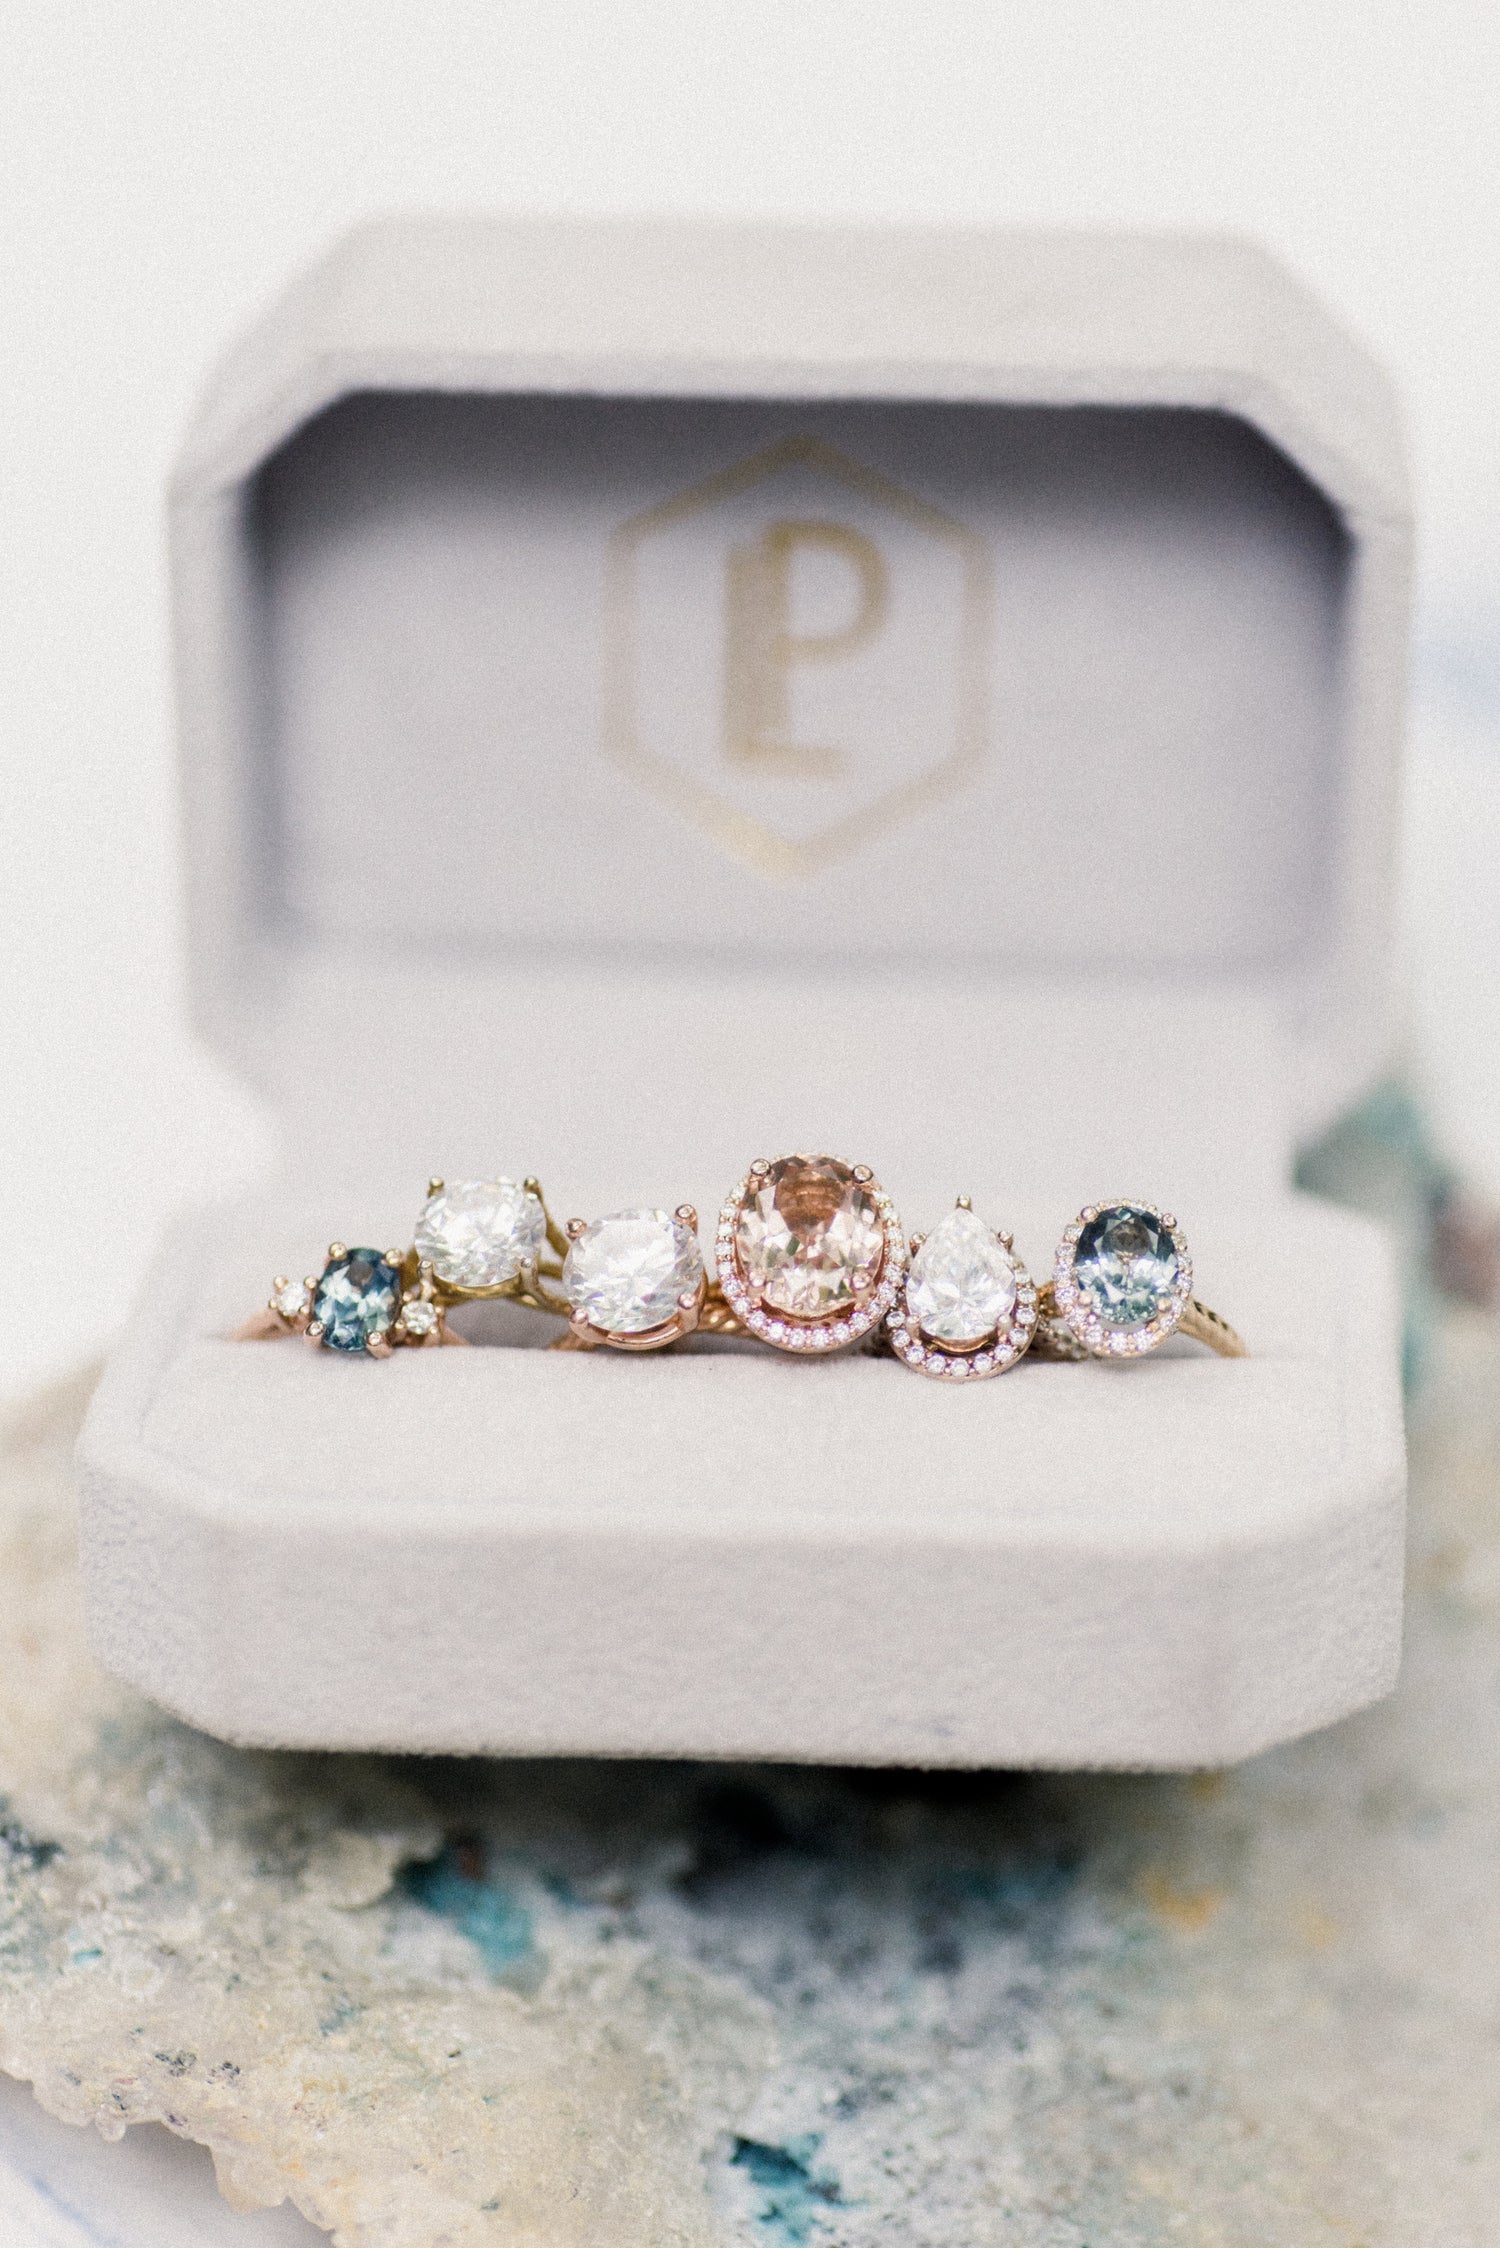 Pay for your engagement ring using an installment plan!